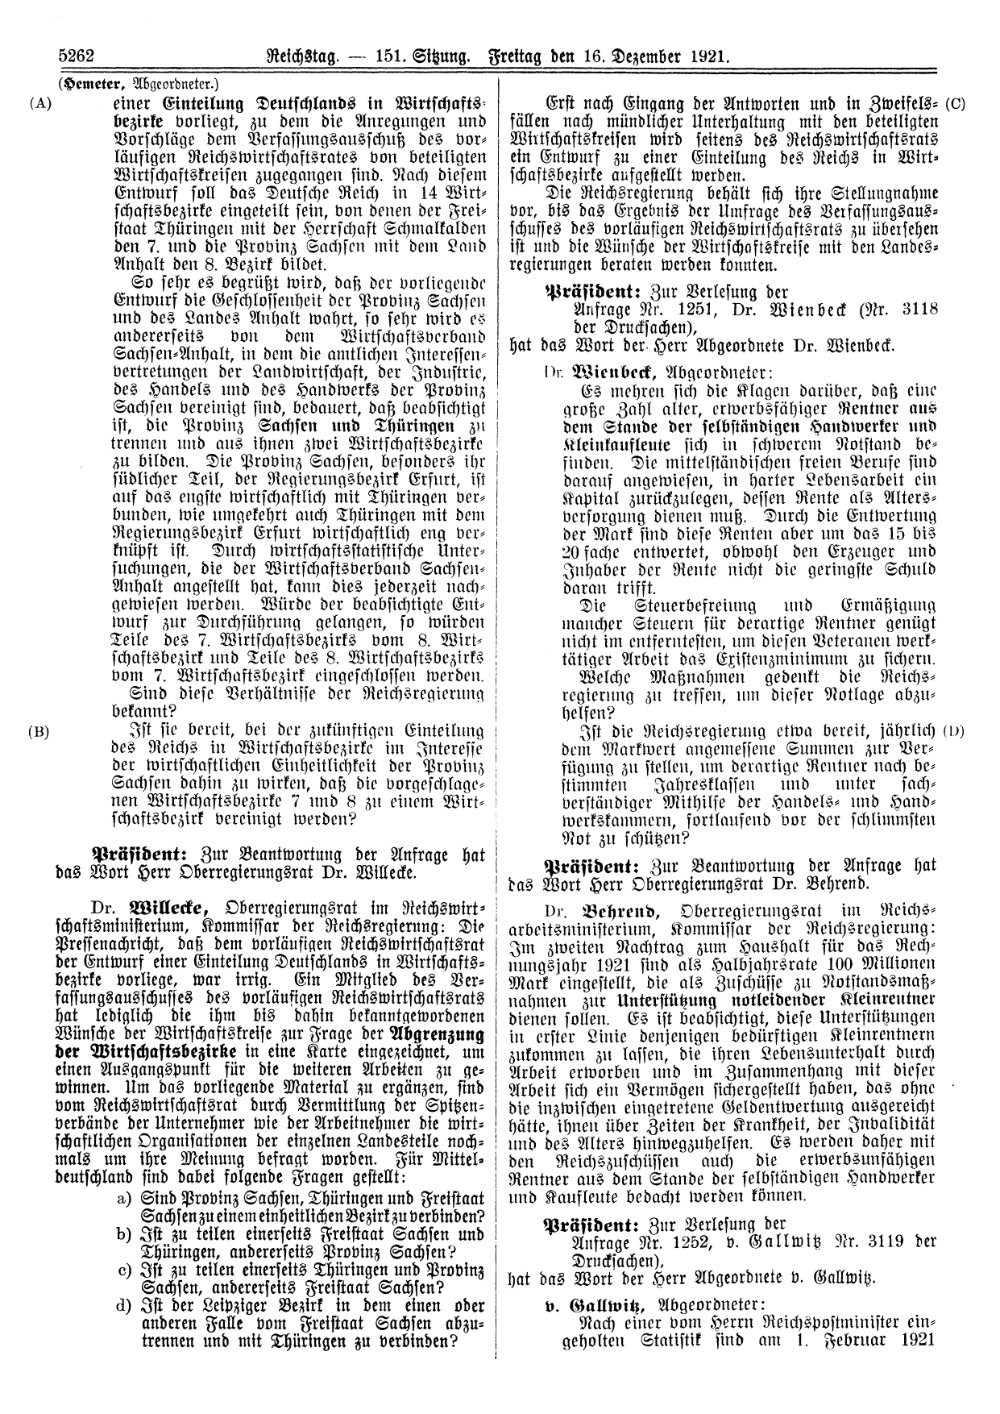 Scan of page 5262